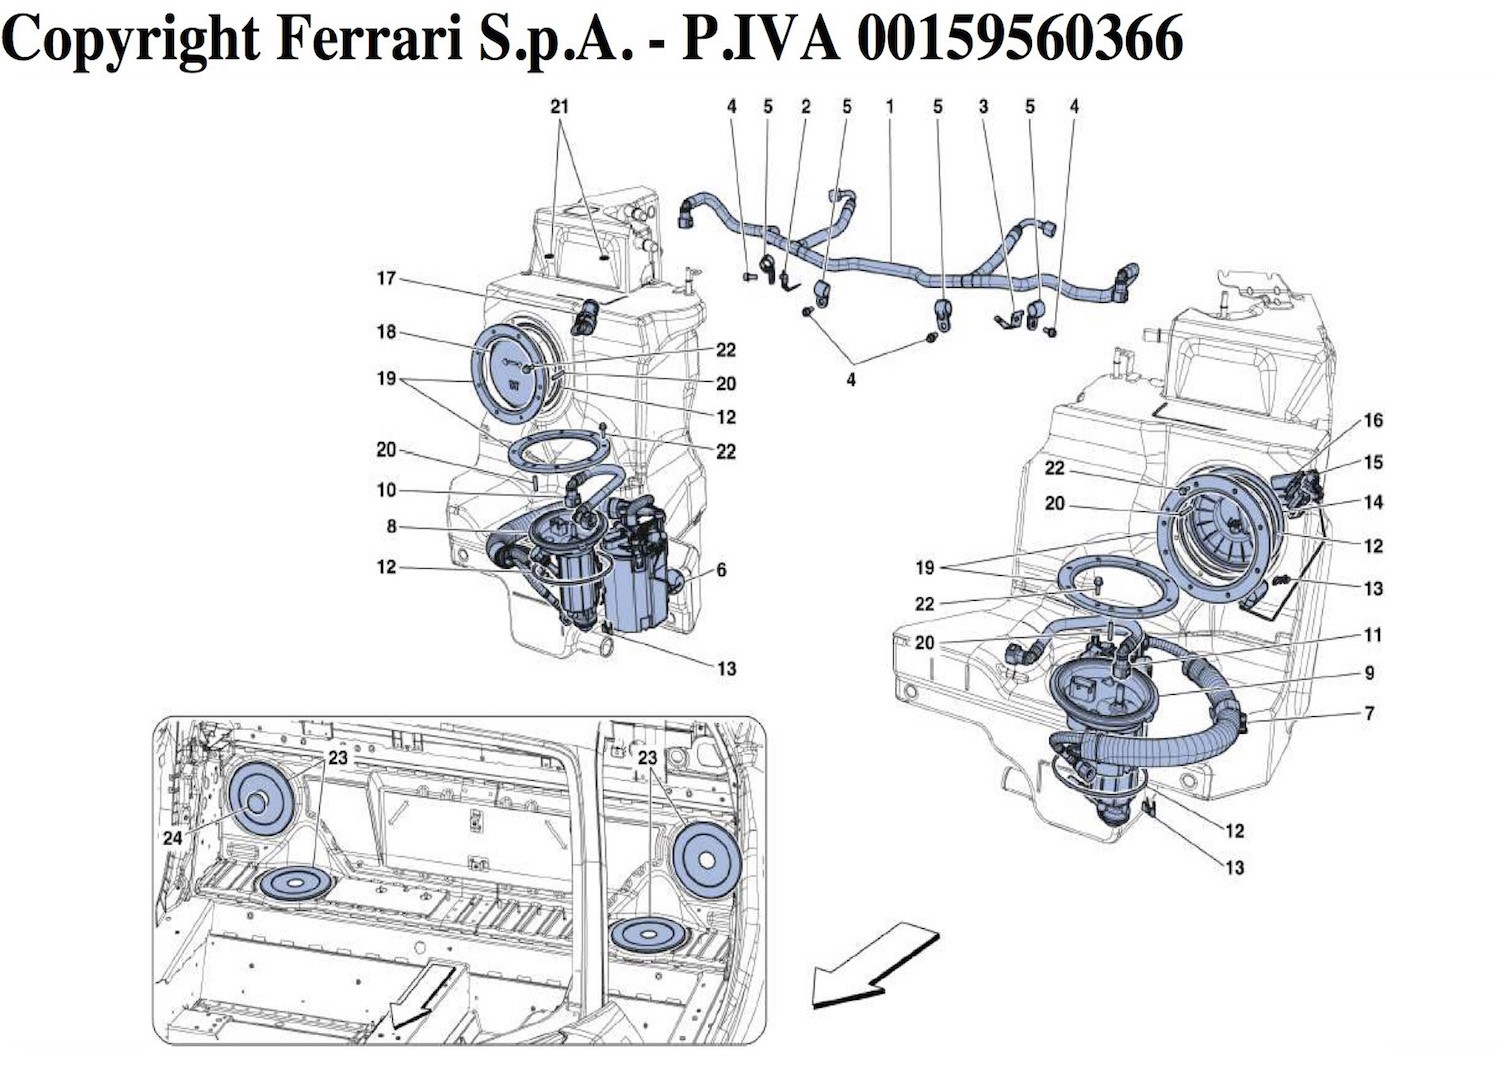 FUEL SYSTEM PUMPS AND PIPES